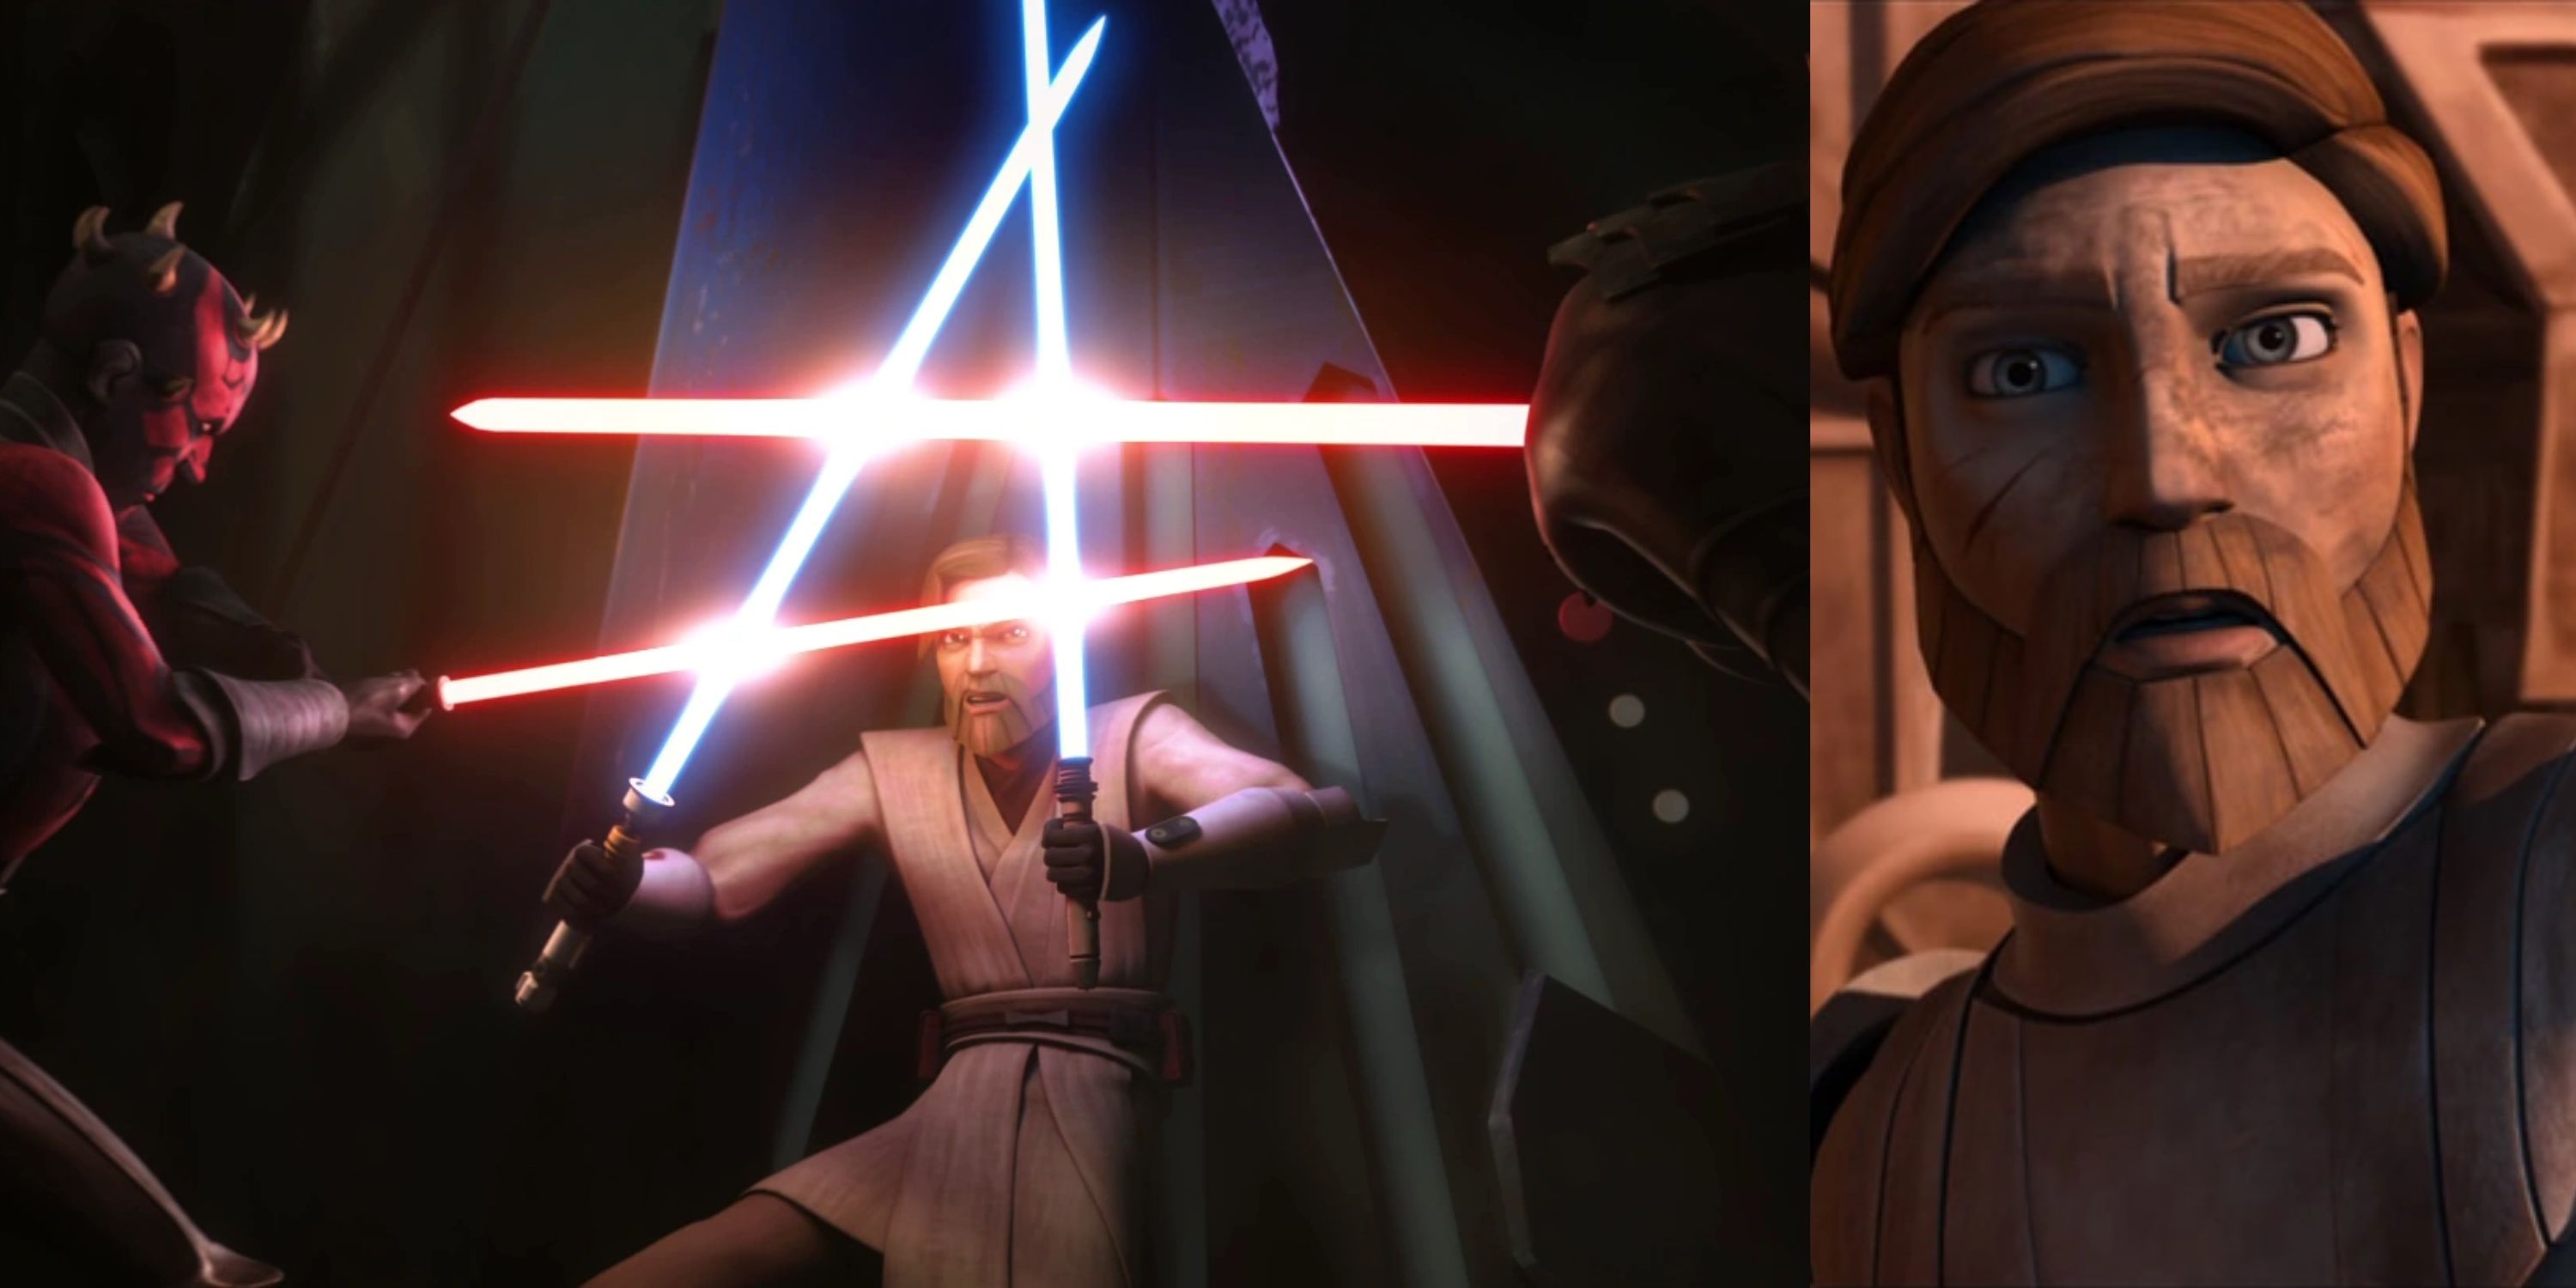 obi-wan duels Maul and Savage in the clone wars